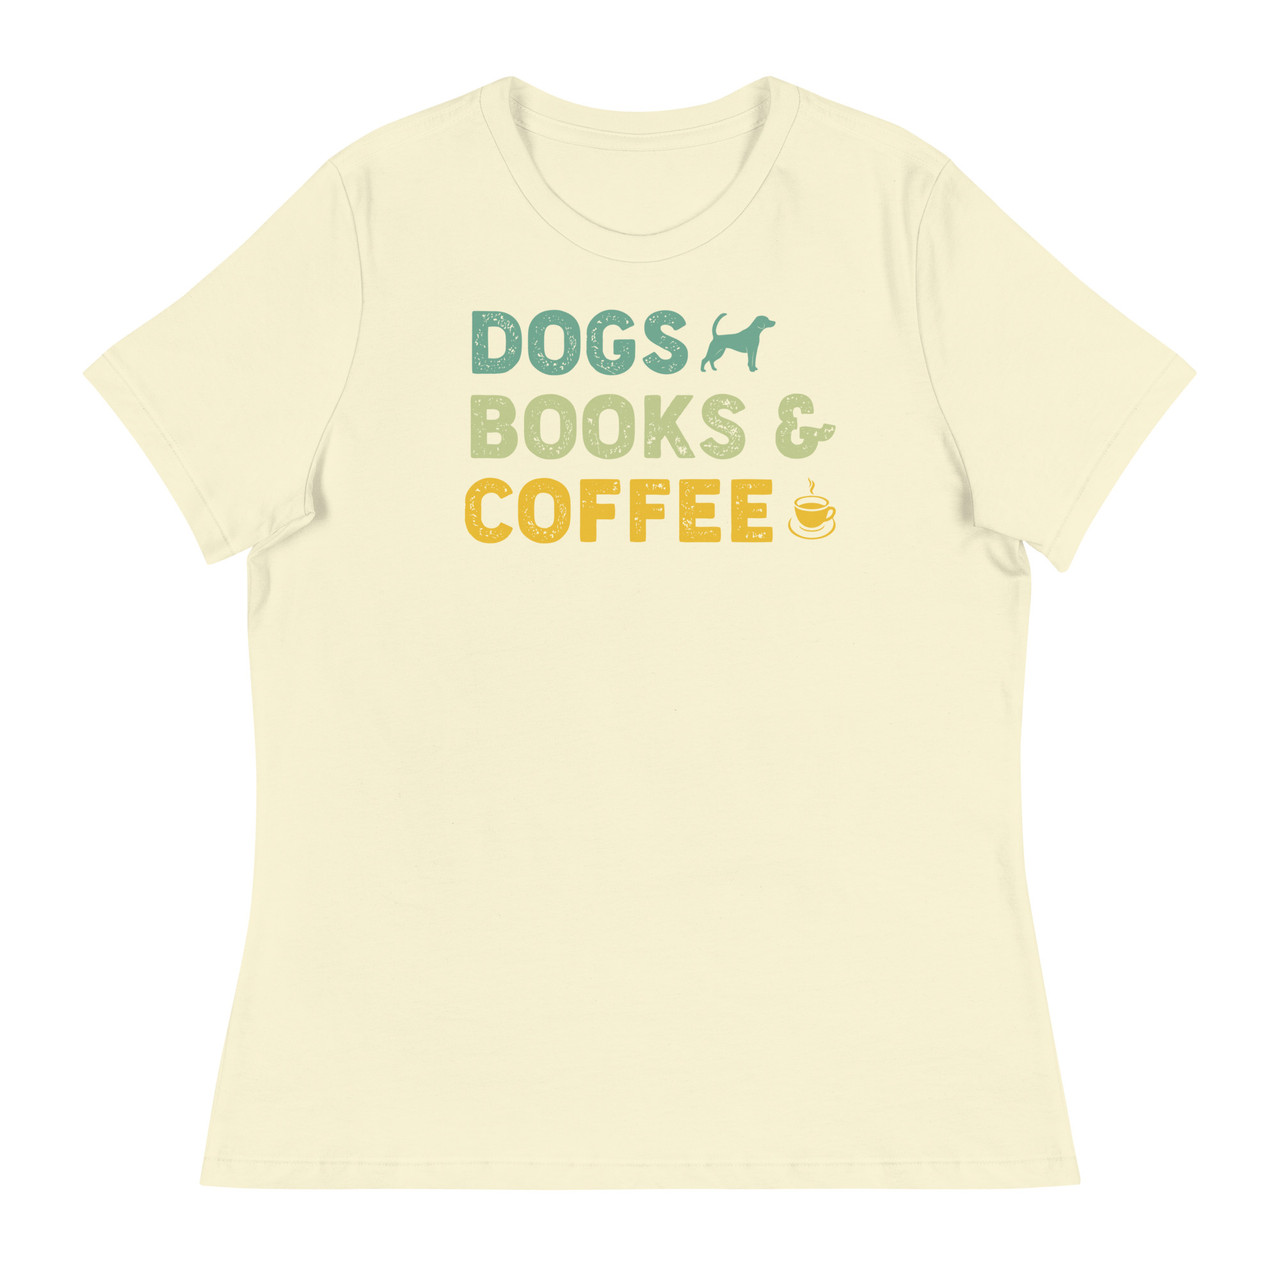 Dogs Books & Coffee Women's Relaxed T-Shirt - Bella + Canvas 6400 